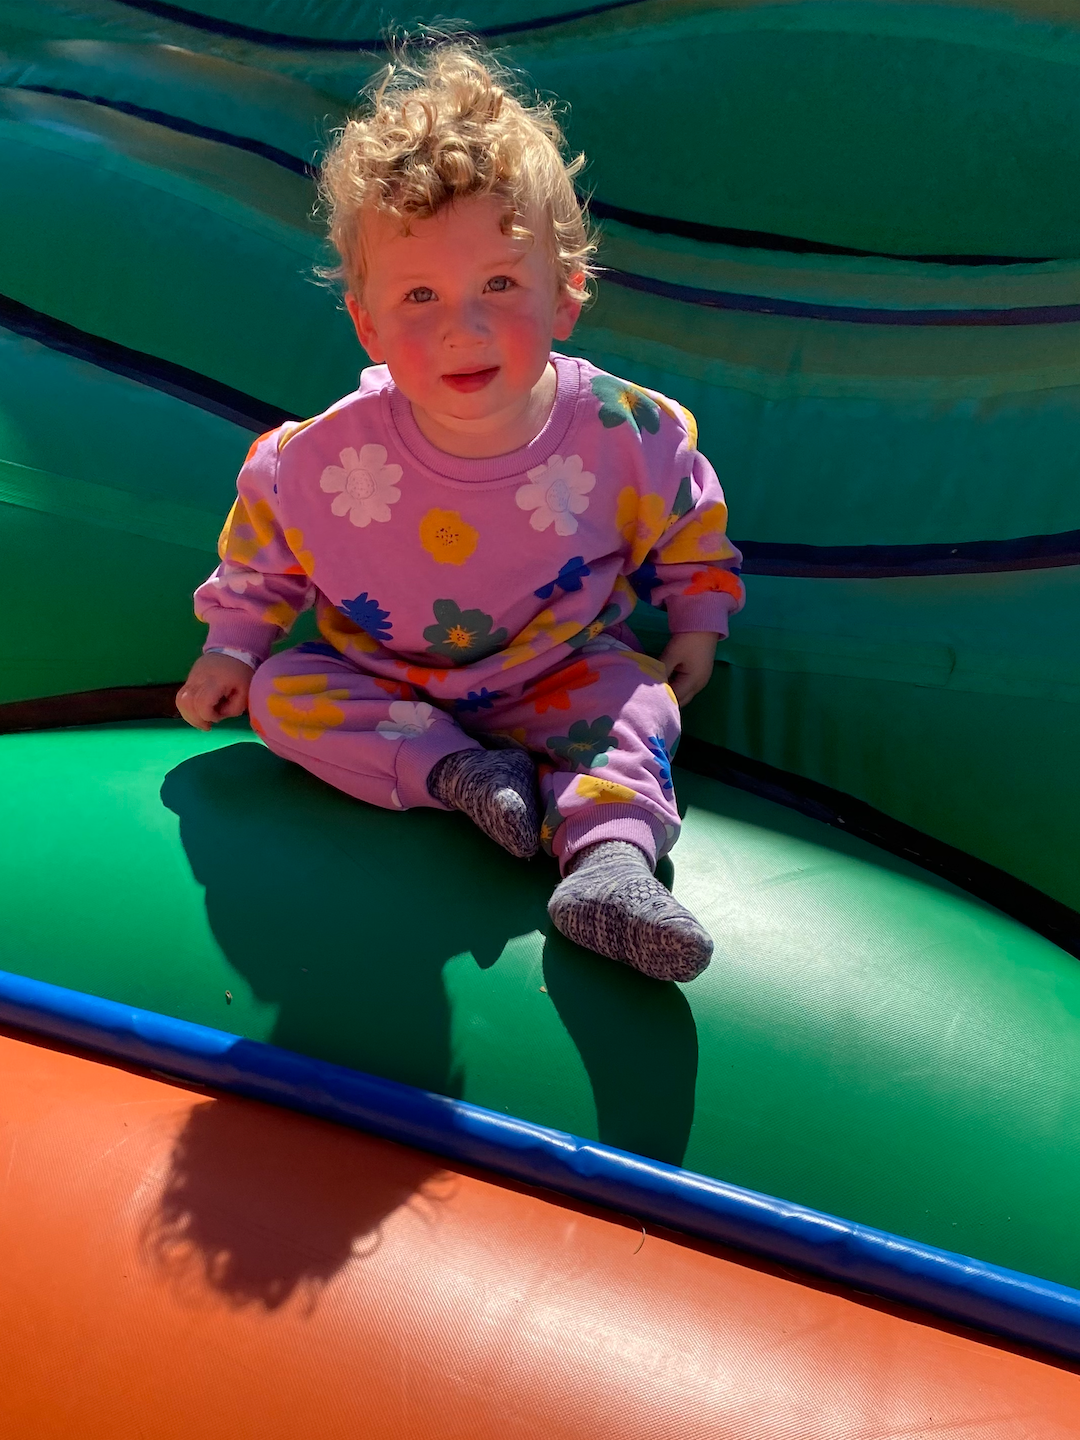 Purple | A toddler on a bouncy castle, wearing a kids' sweatshirt and pants set in purple, printed with yellow, orange, green, blue and white flowers